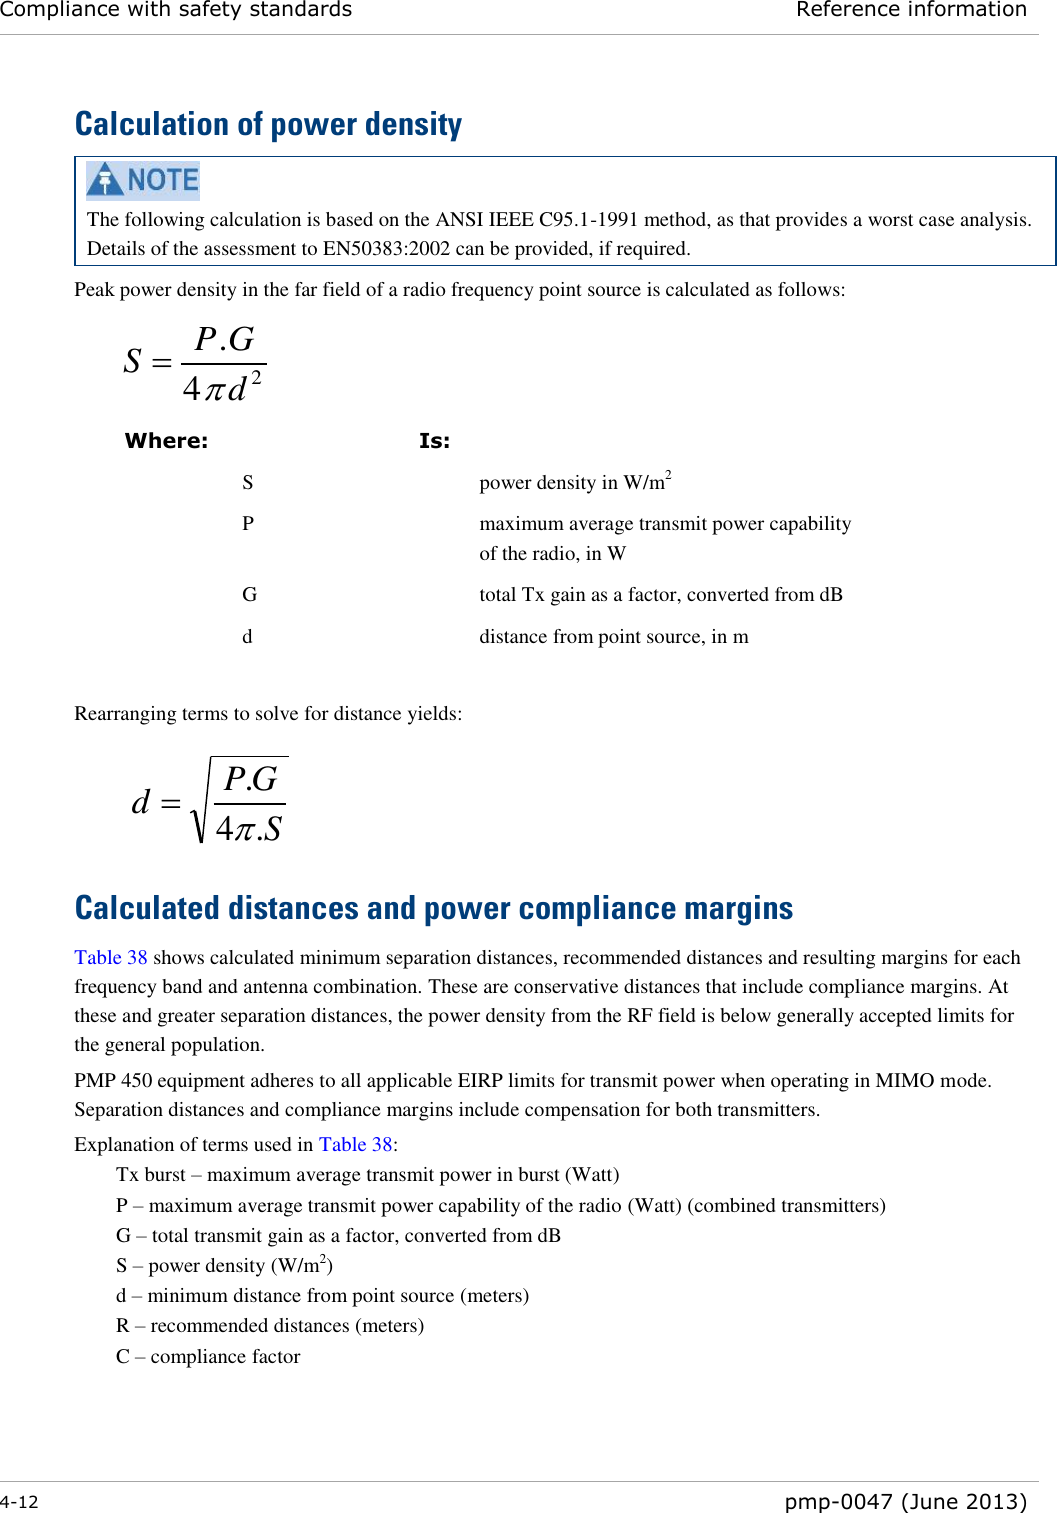 Compliance with safety standards Reference information  4-12  pmp-0047 (June 2013)  Calculation of power density  The following calculation is based on the ANSI IEEE C95.1-1991 method, as that provides a worst case analysis.  Details of the assessment to EN50383:2002 can be provided, if required. Peak power density in the far field of a radio frequency point source is calculated as follows:    Where:  Is:   S  power density in W/m2  P  maximum average transmit power capability of the radio, in W  G  total Tx gain as a factor, converted from dB  d  distance from point source, in m  Rearranging terms to solve for distance yields:     Calculated distances and power compliance margins Table 38 shows calculated minimum separation distances, recommended distances and resulting margins for each frequency band and antenna combination. These are conservative distances that include compliance margins. At these and greater separation distances, the power density from the RF field is below generally accepted limits for the general population. PMP 450 equipment adheres to all applicable EIRP limits for transmit power when operating in MIMO mode.  Separation distances and compliance margins include compensation for both transmitters. Explanation of terms used in Table 38: Tx burst – maximum average transmit power in burst (Watt) P – maximum average transmit power capability of the radio (Watt) (combined transmitters) G – total transmit gain as a factor, converted from dB S – power density (W/m2) d – minimum distance from point source (meters) R – recommended distances (meters) C – compliance factor    24.dGPSSGPd.4.